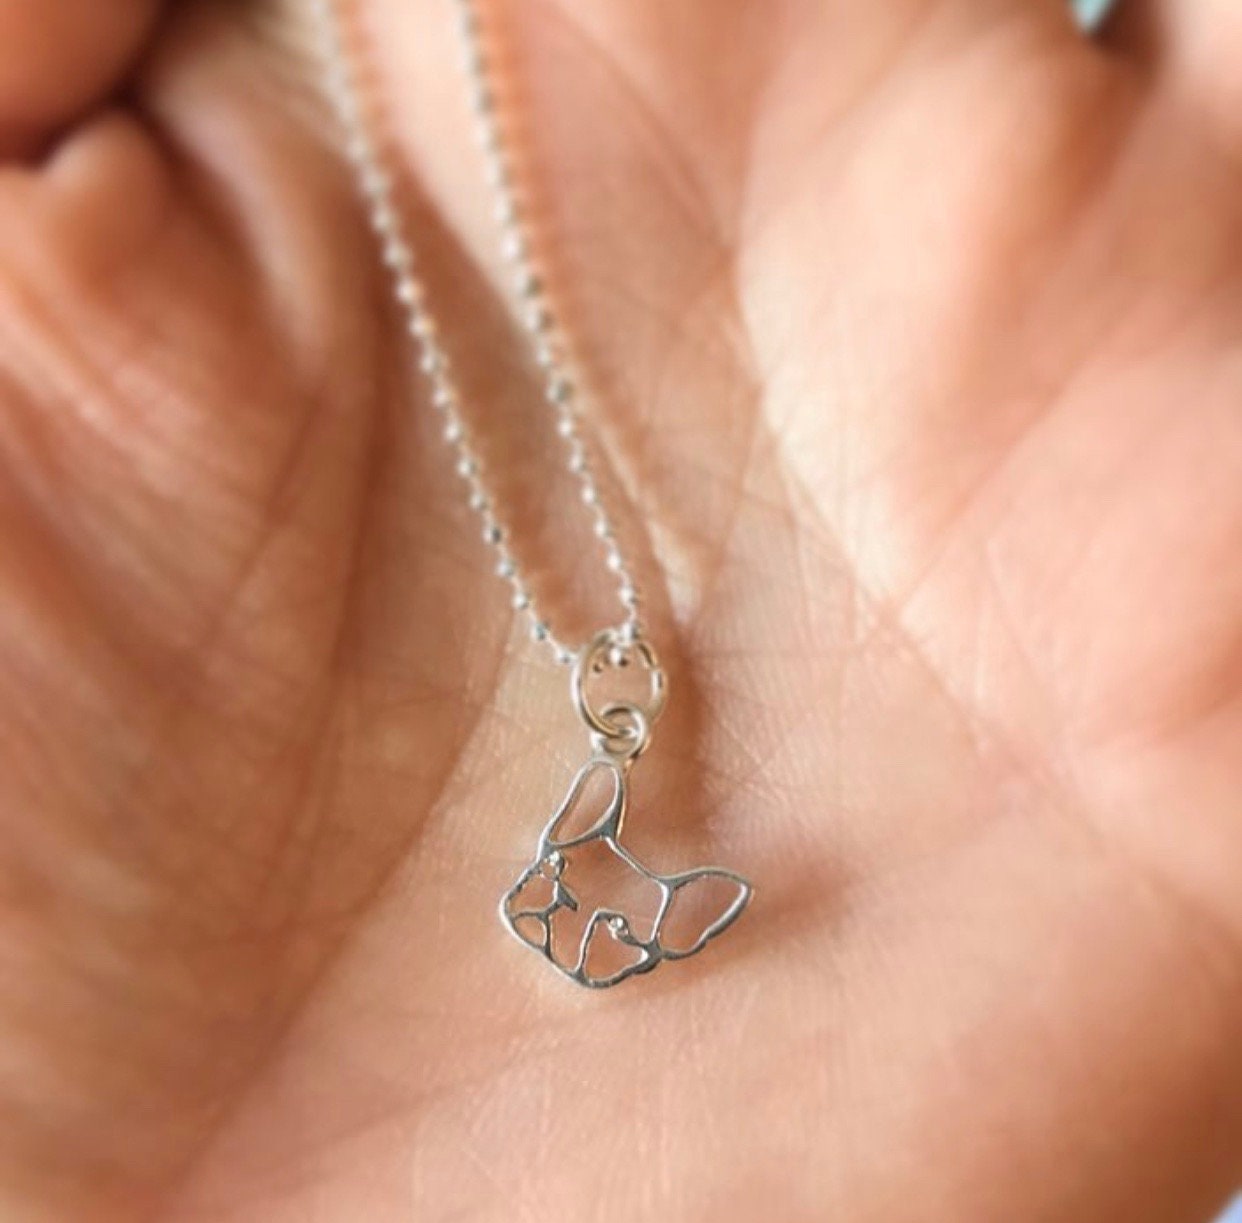 SPECIAL CAUSE: Frenchie bulldog necklace (sterling silver)